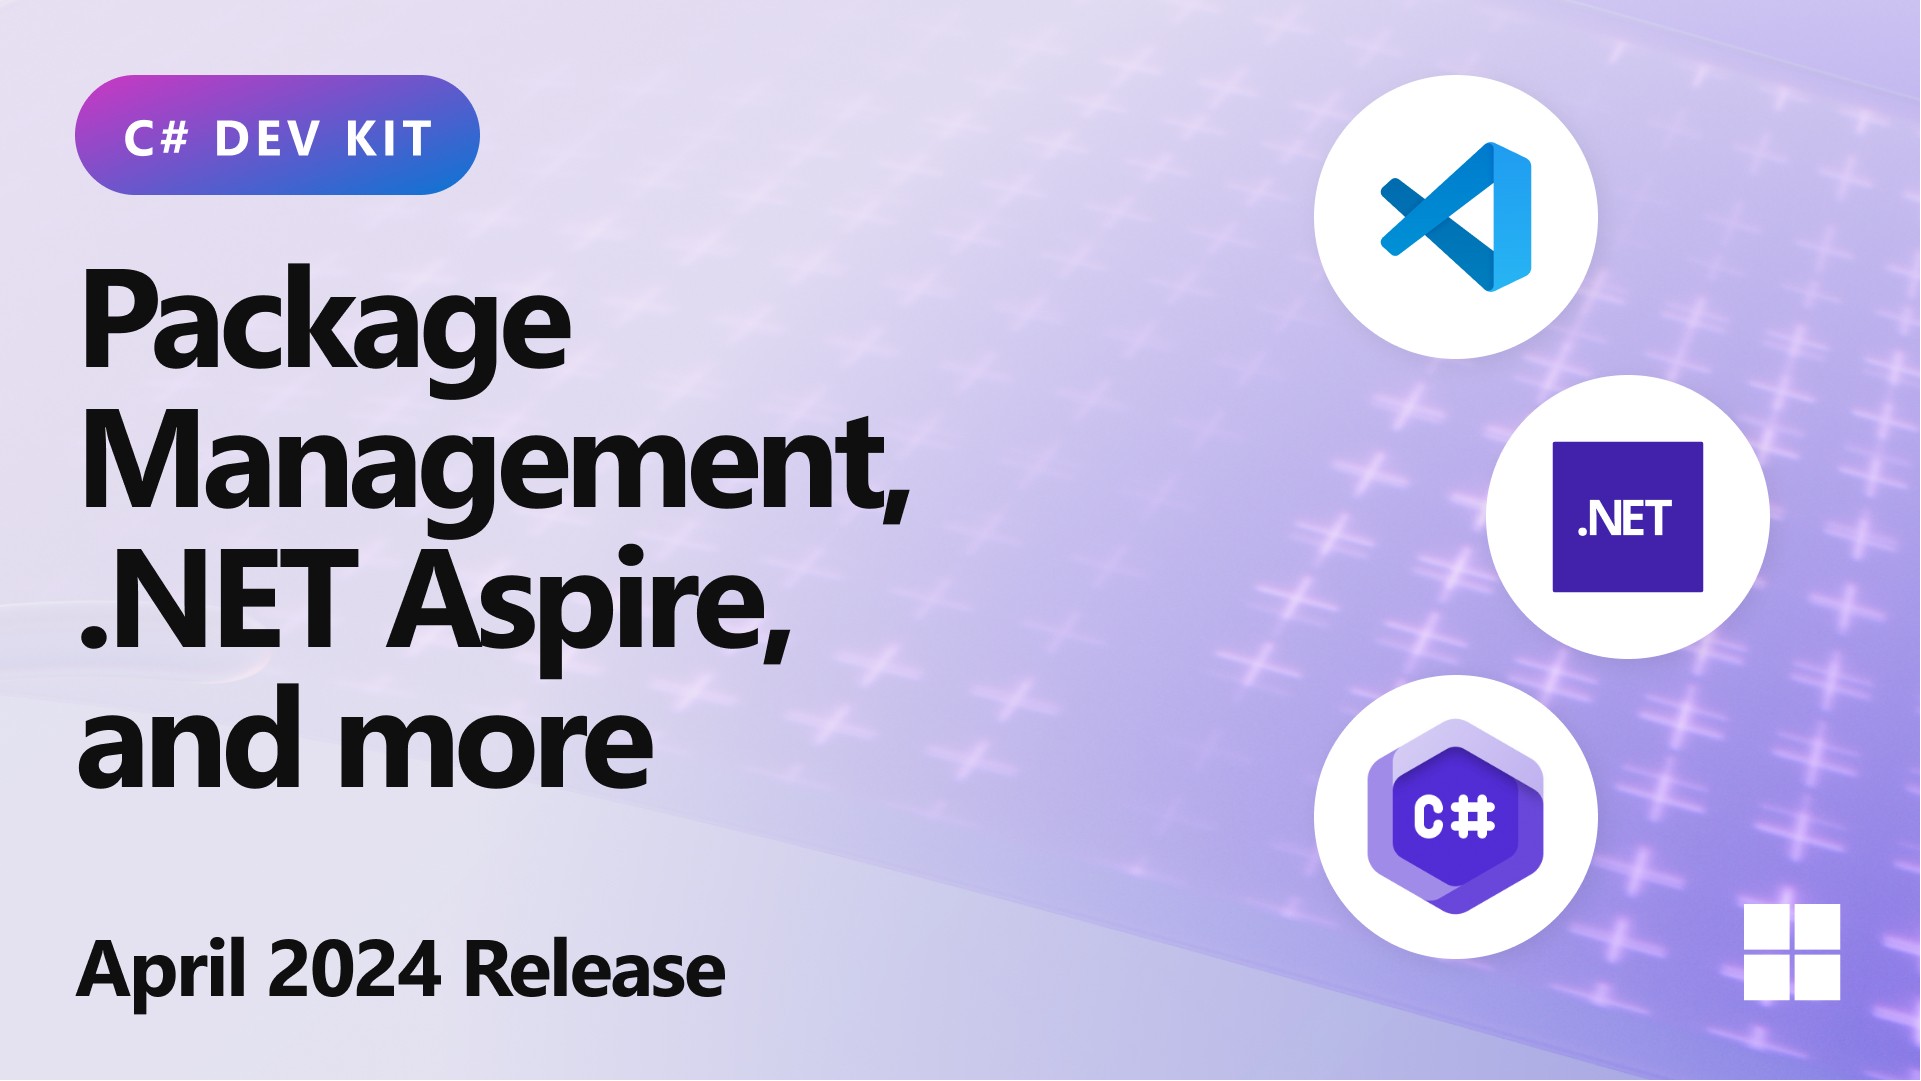 Package Management & improved .NET Aspire support come to C# Dev Kit